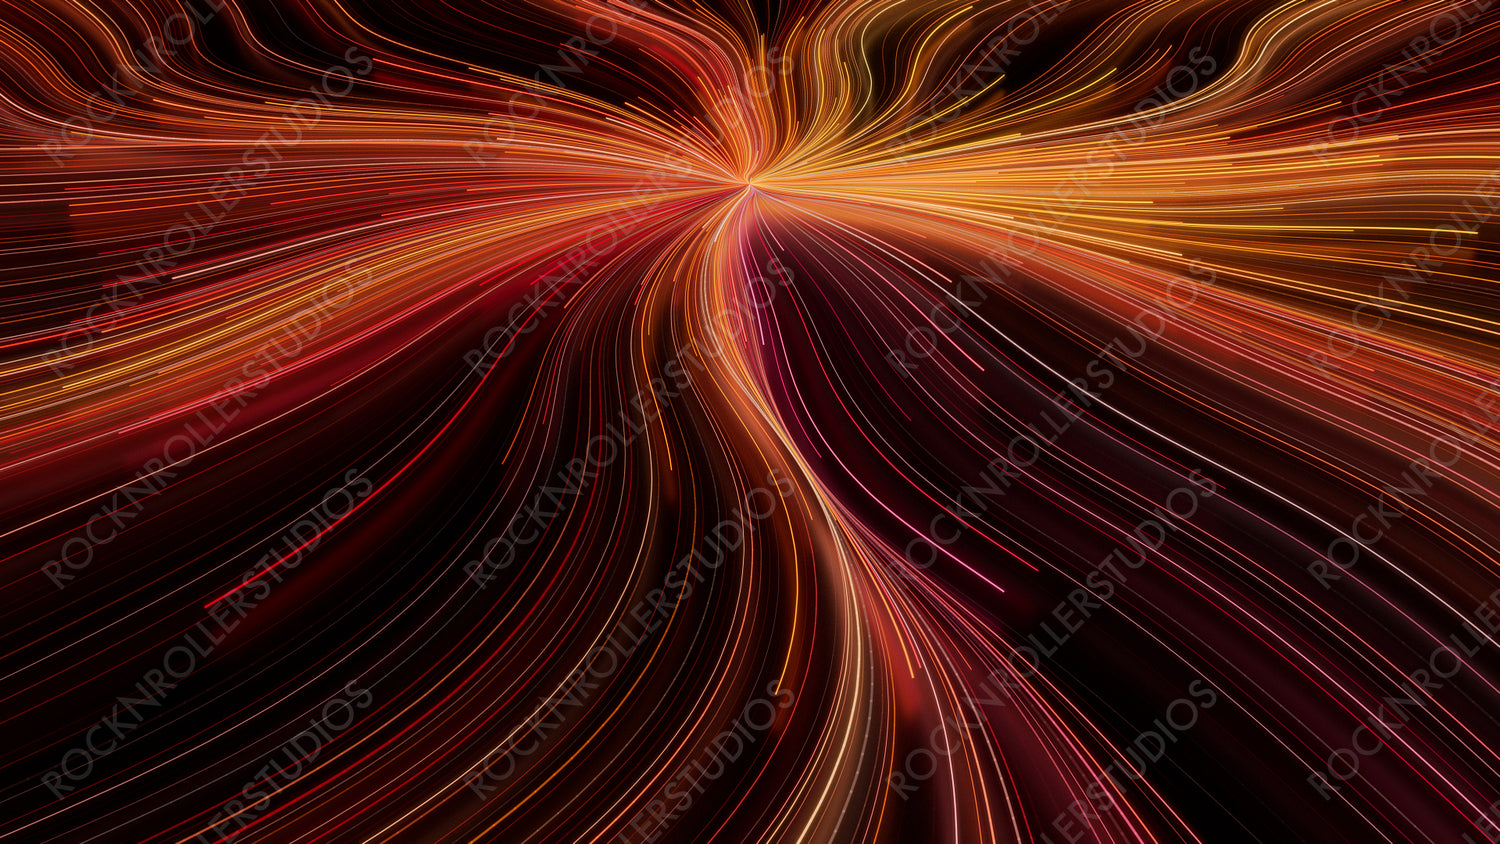 Colorful Neon Lines Background with Orange, Yellow and Red Stripes. 3D Render.